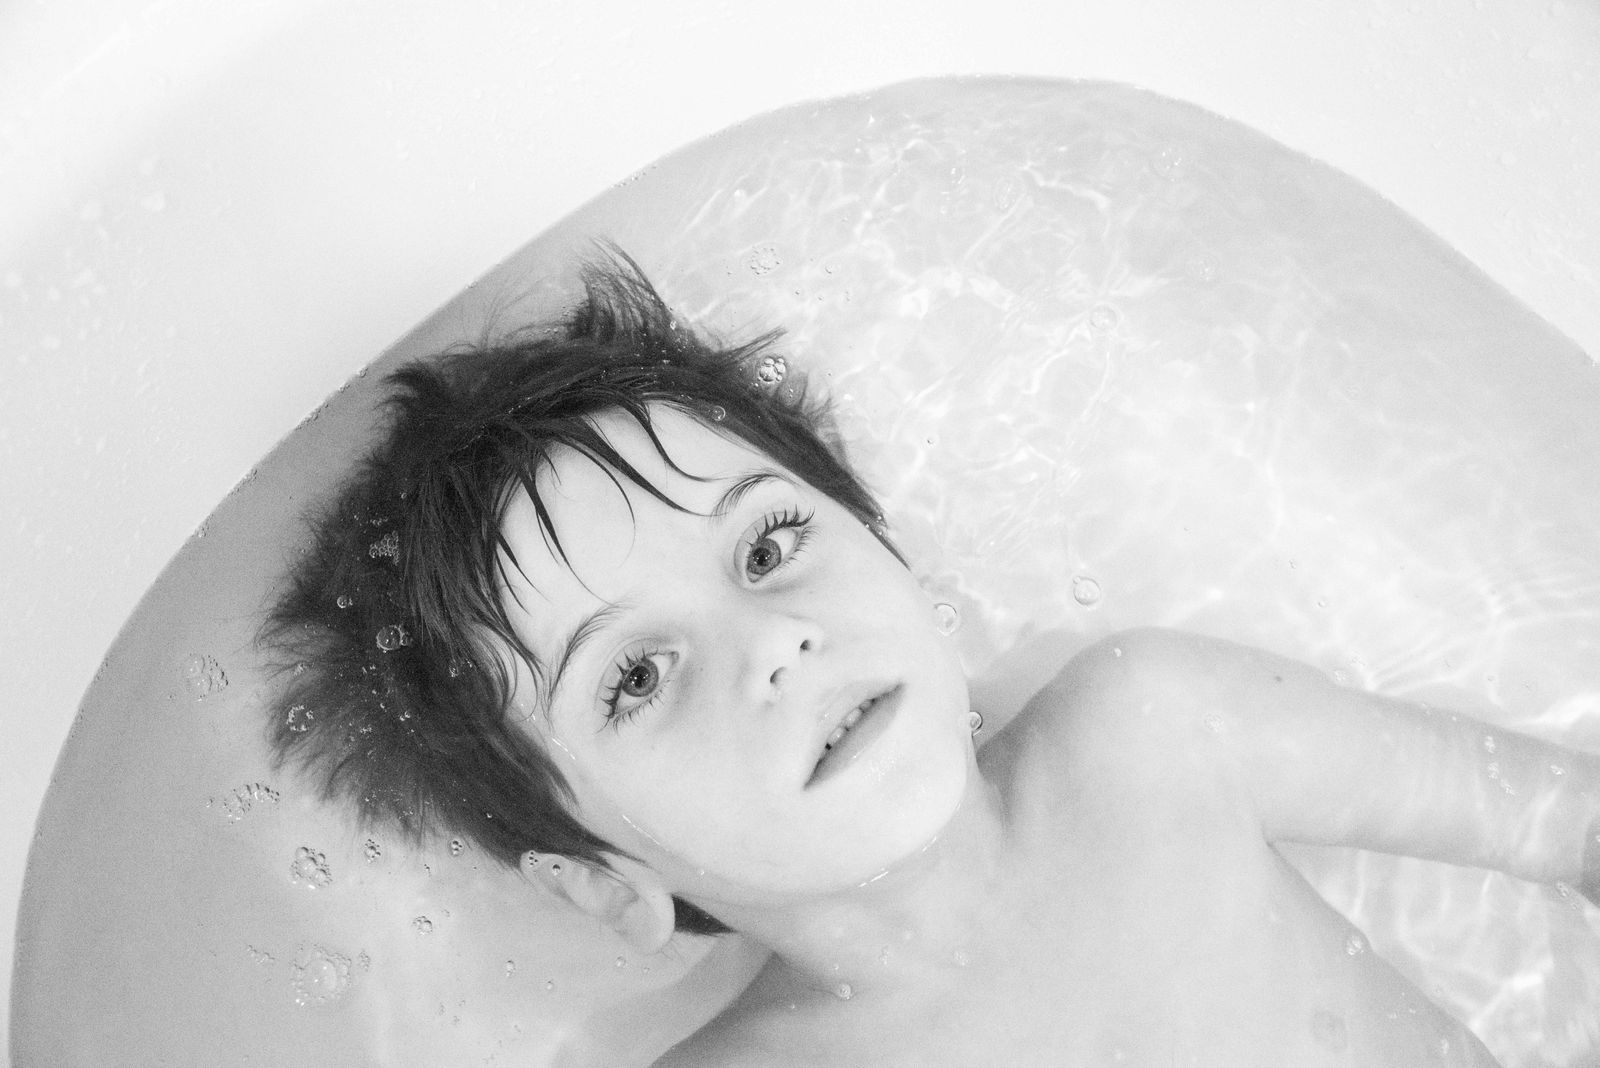 © Madelaine Ekserciyan - The last one to take the bath. He wanted to enjoy. Alone. In peace.